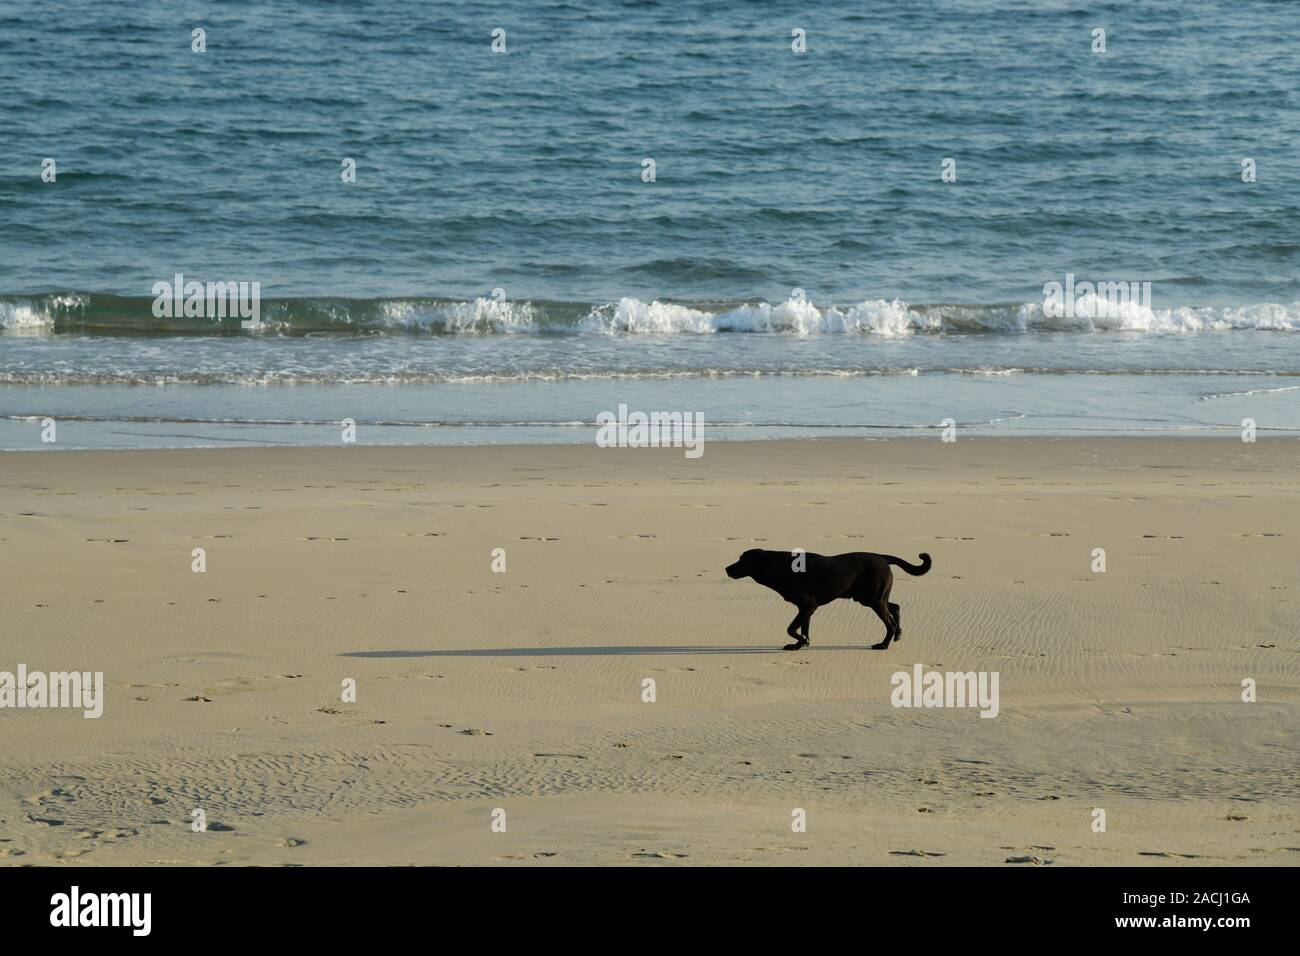 Durban, South Africa, animals, silhouette of large black pet dog walking on beach in morning, action, movement, outdoors, exercise Stock Photo